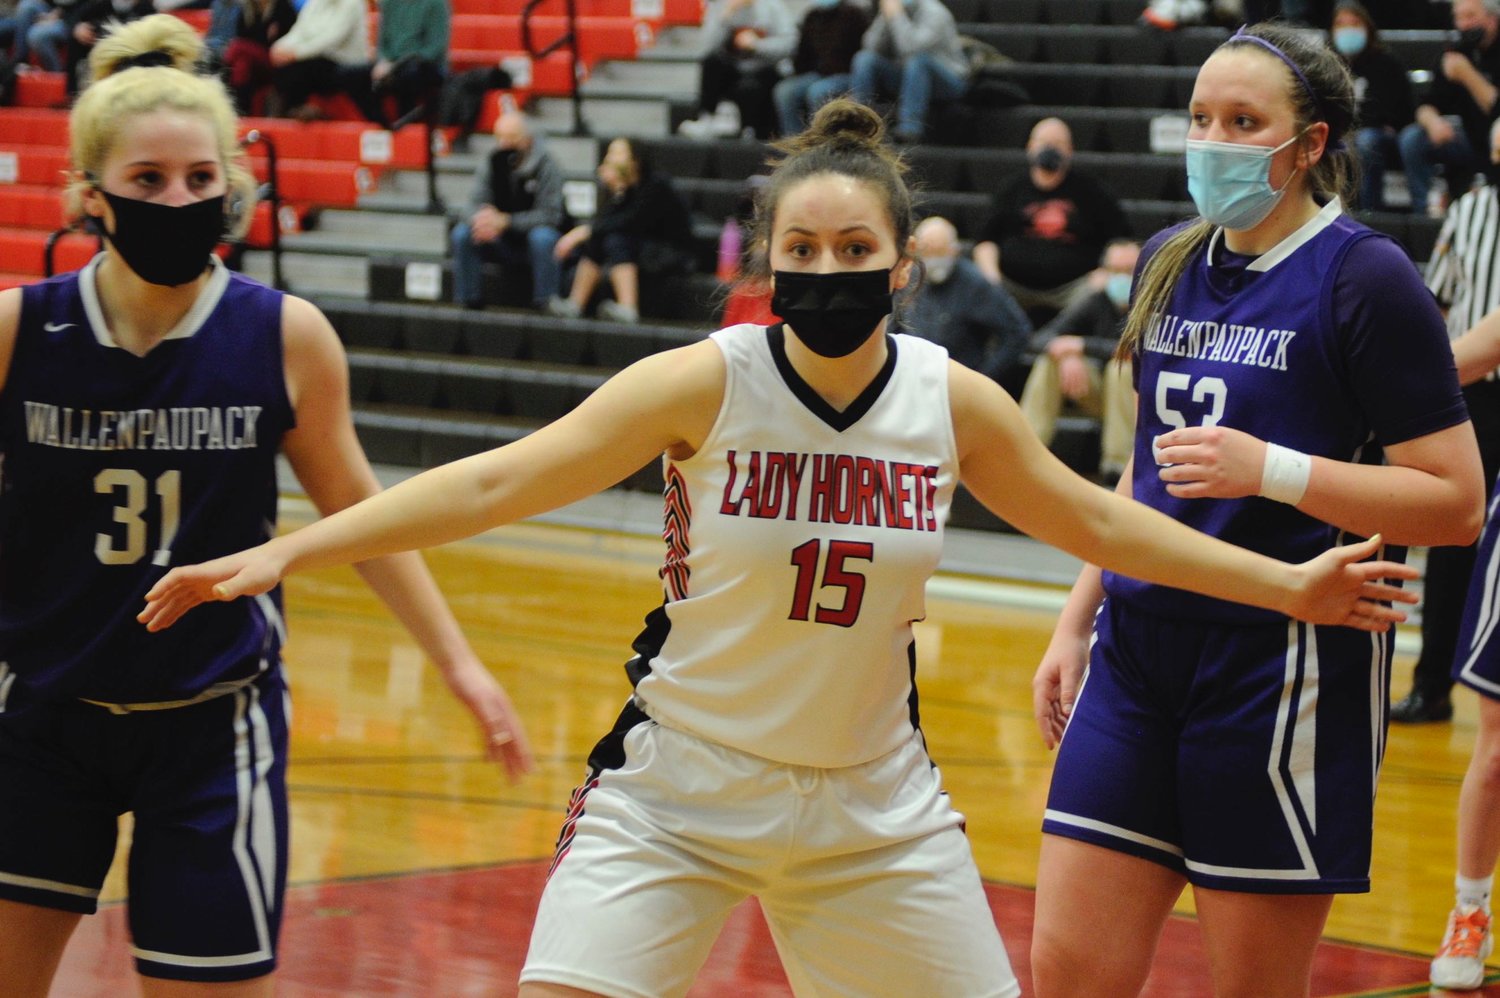 Guardian of the glass. Honesdale’s senior co-captain Grace Maxson started on the hardwood at Preston in the sixth grade. In Friday’s game against the Lady Buckhorns, she posted 12 points.